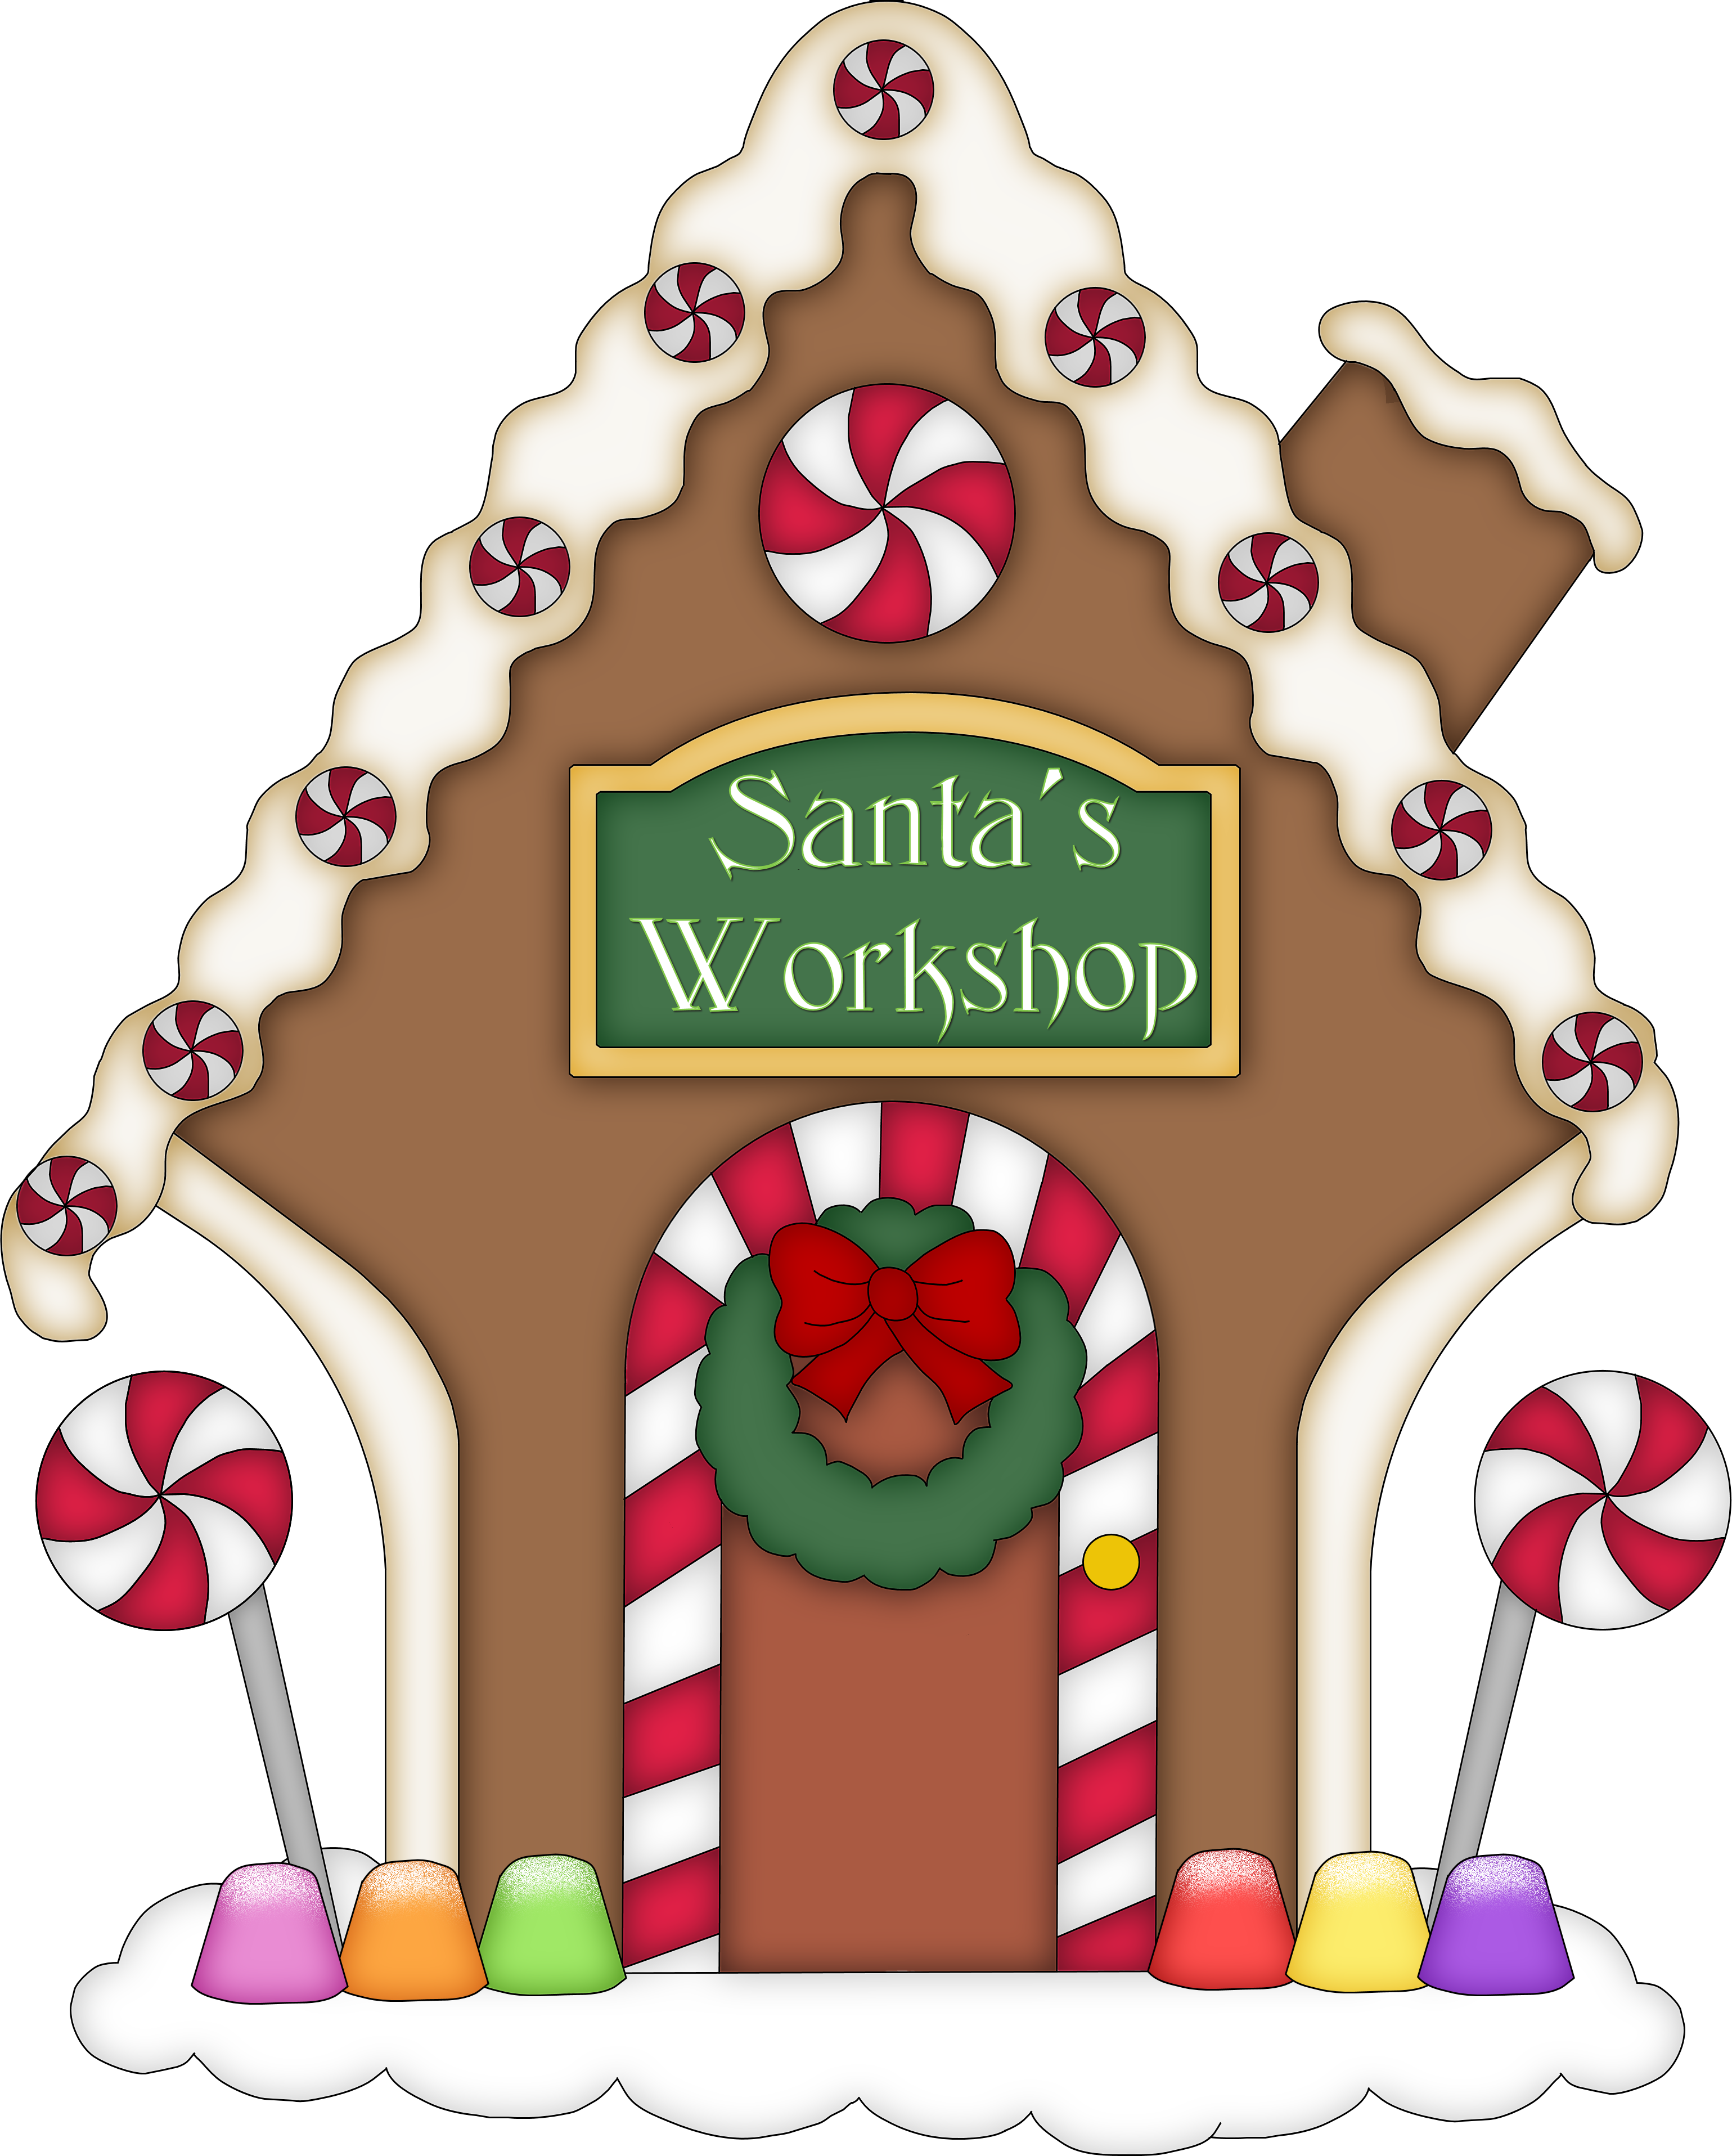 gingerbread clipart hansel and gretel house